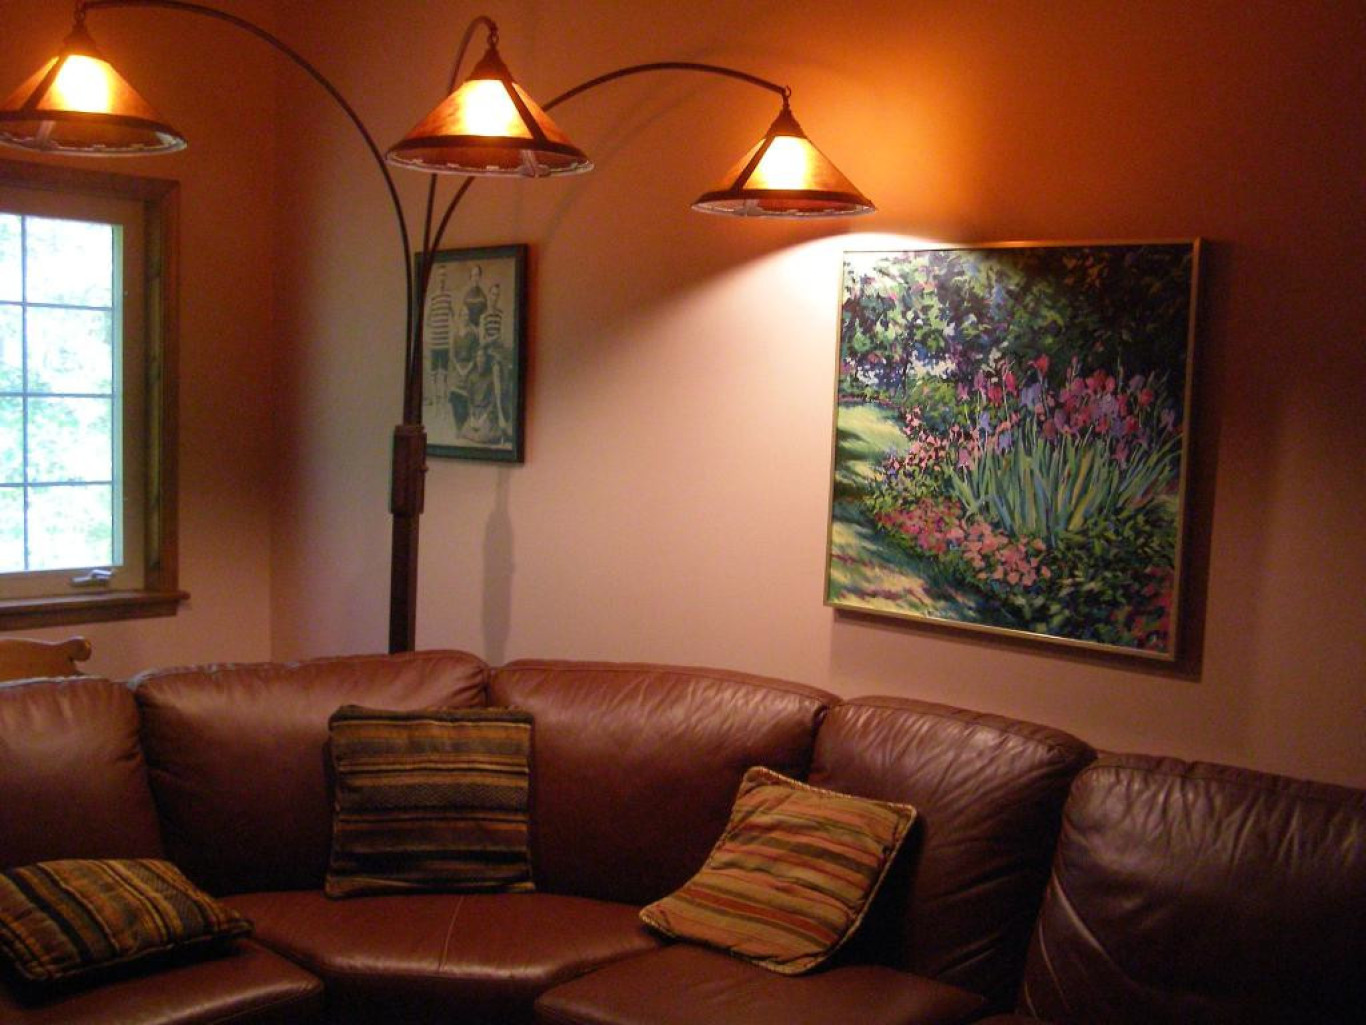 Floor Lamp Placement And Decorating, Behind The Couch Corner Lamp